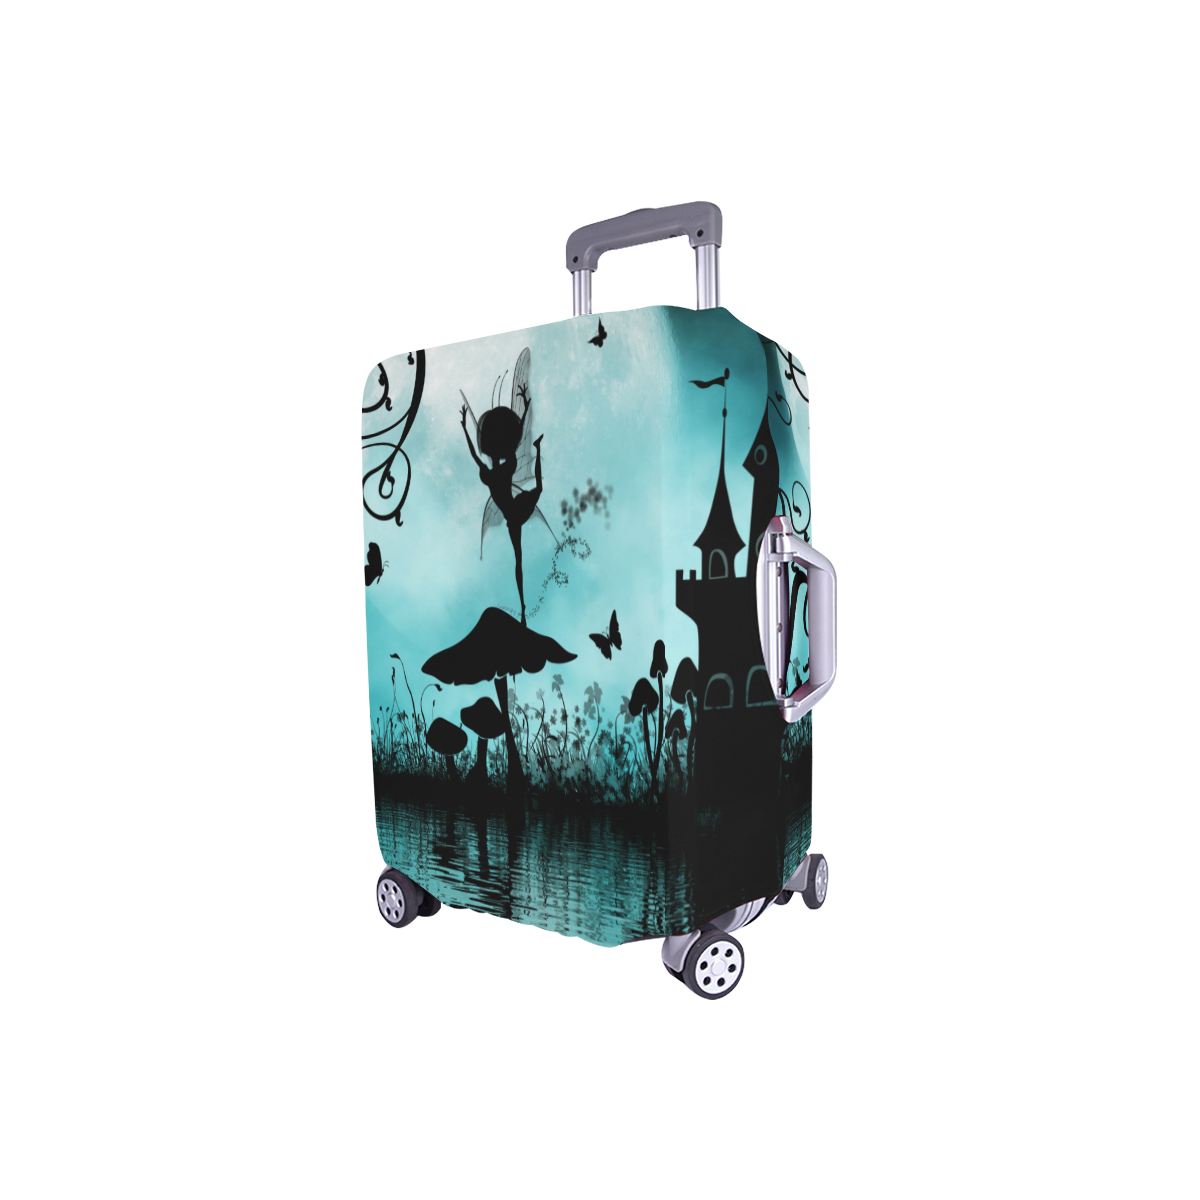 Dancing in the night Luggage Cover/Small 18"-21"